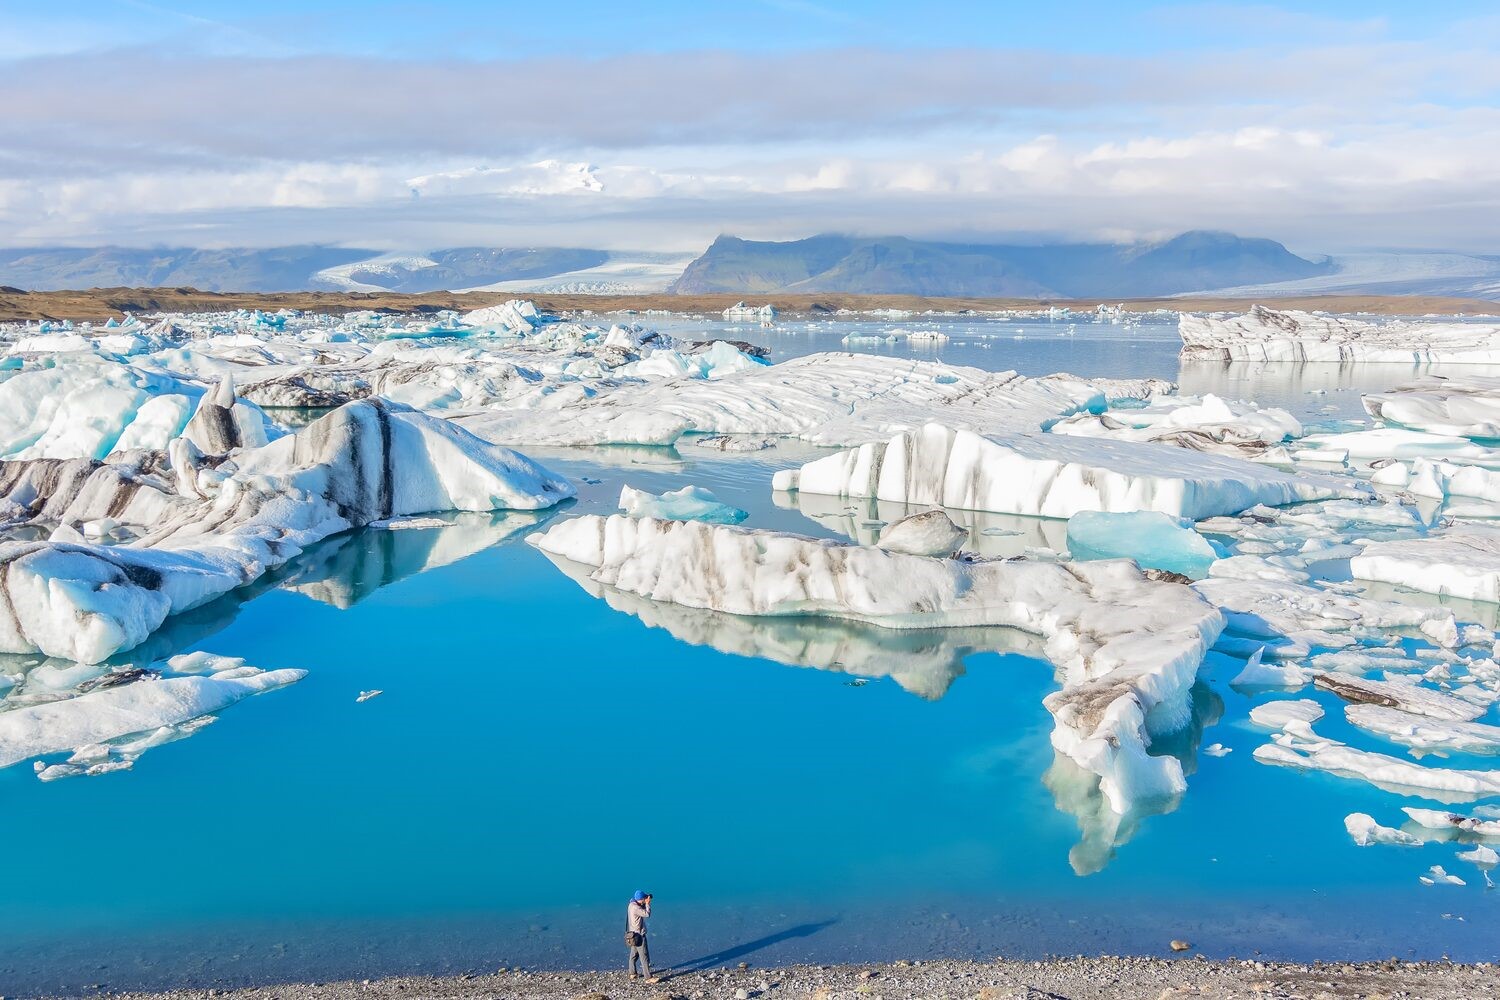 Tourist photographing Icebergs in bright blue Jokulsarlon glacial lake, Iceland with cloudy skies in background